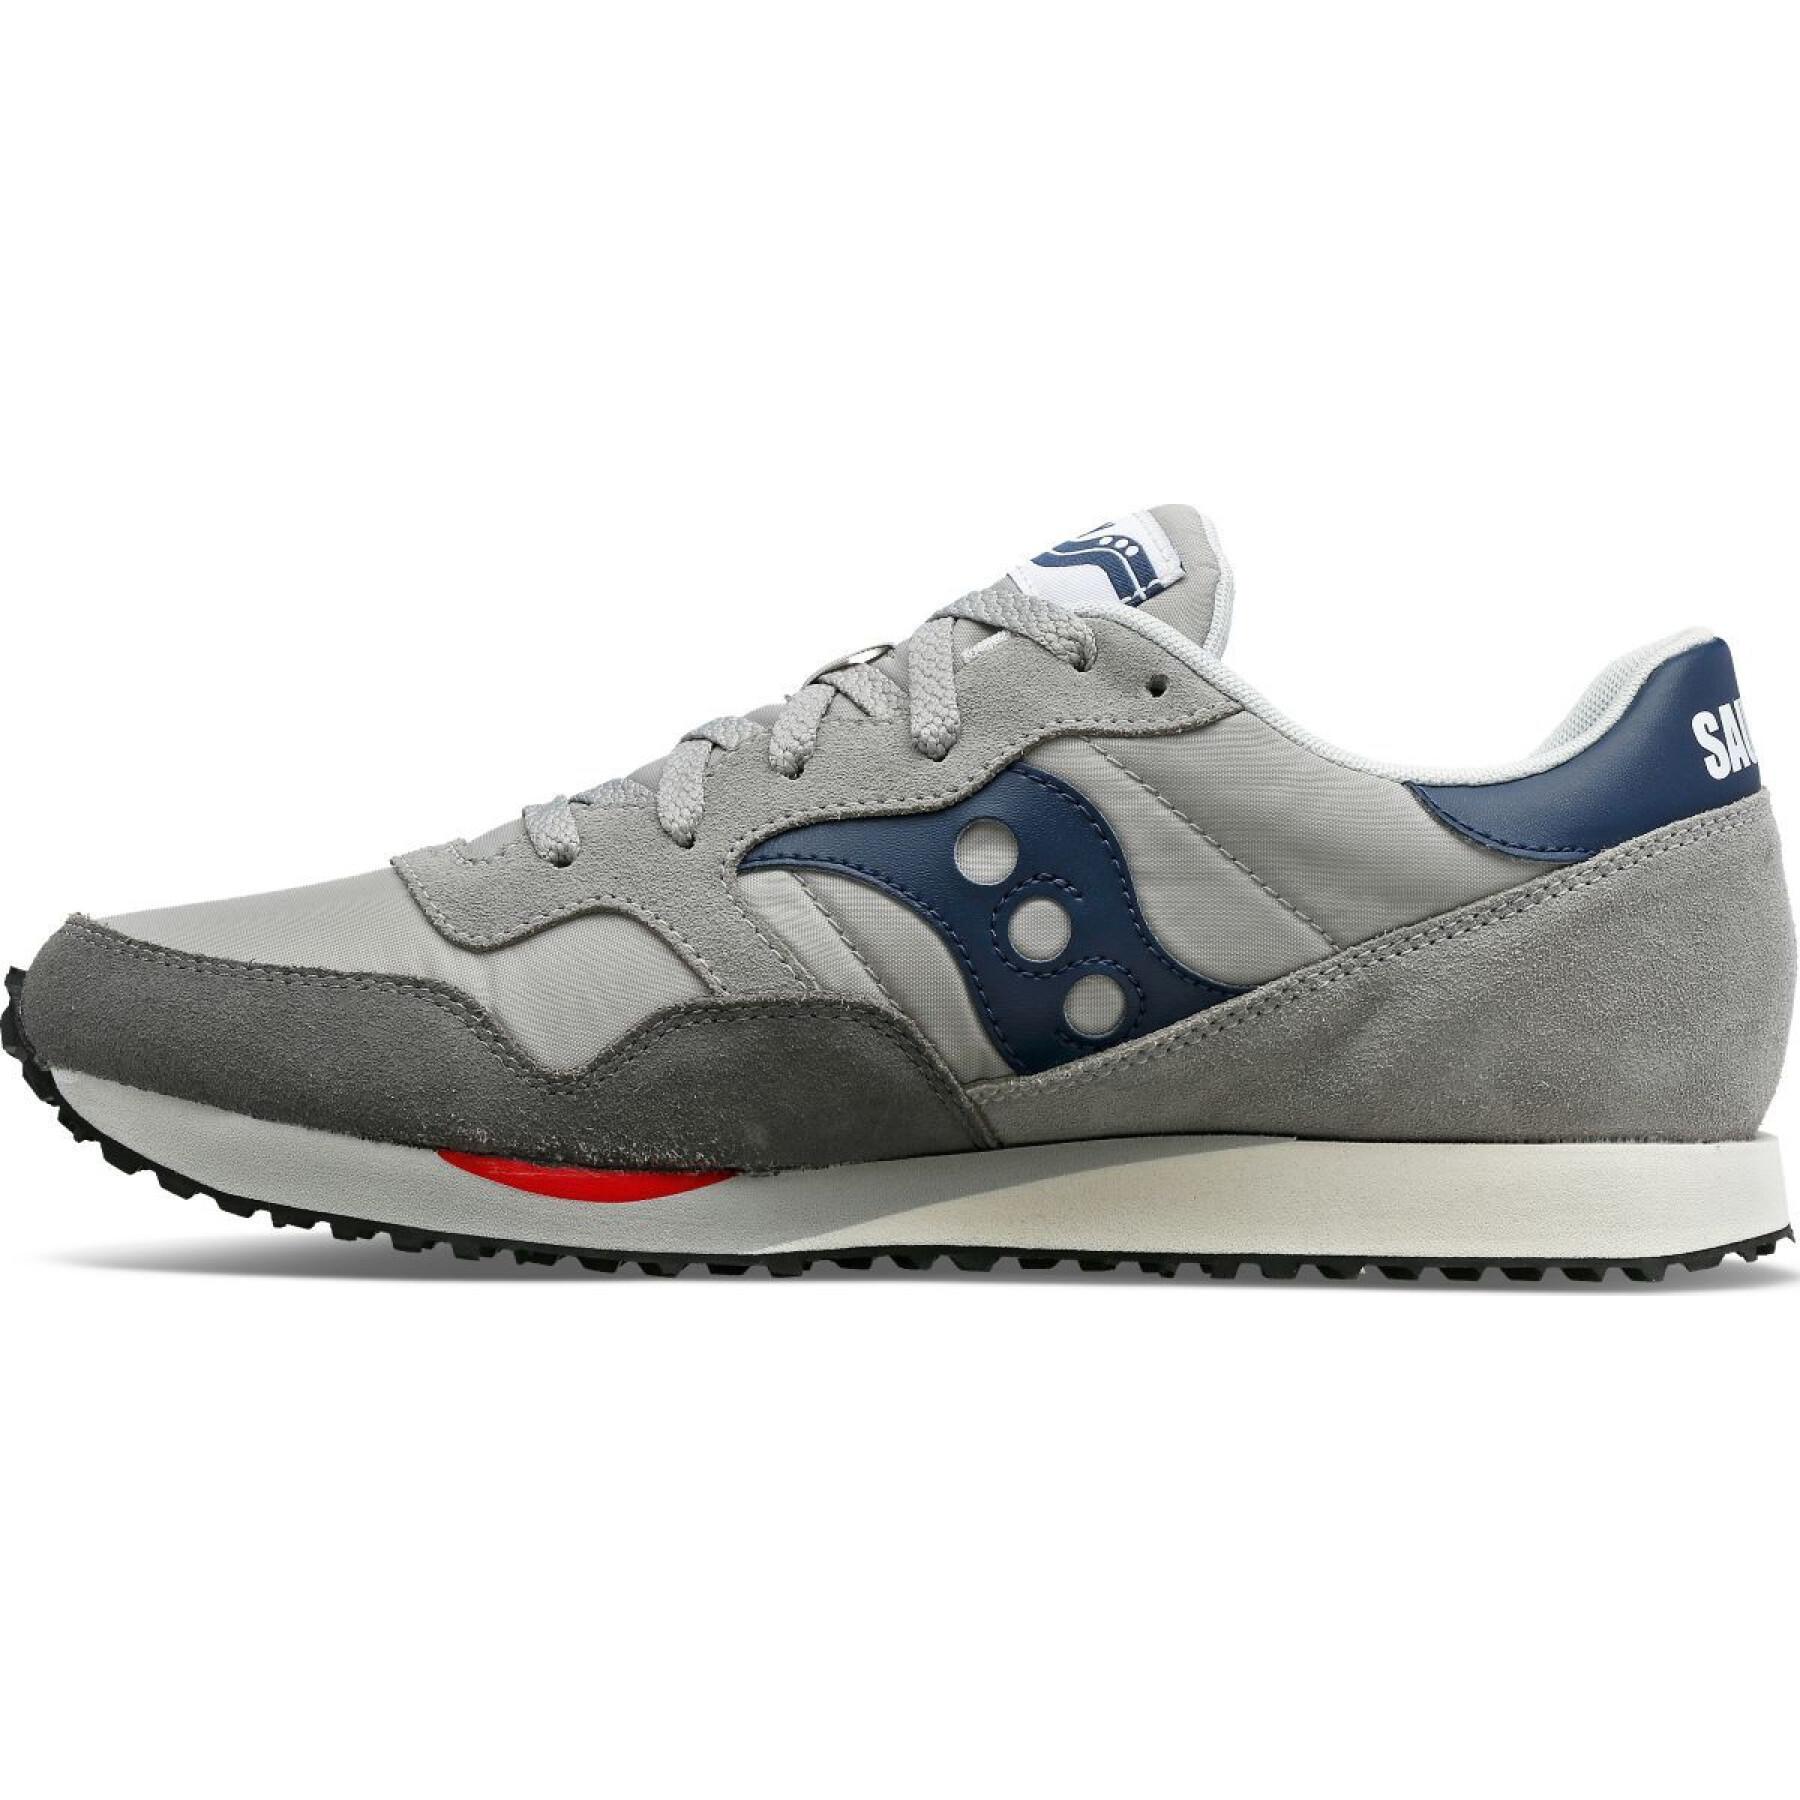 Trainers Saucony DXN Trainer Vintage